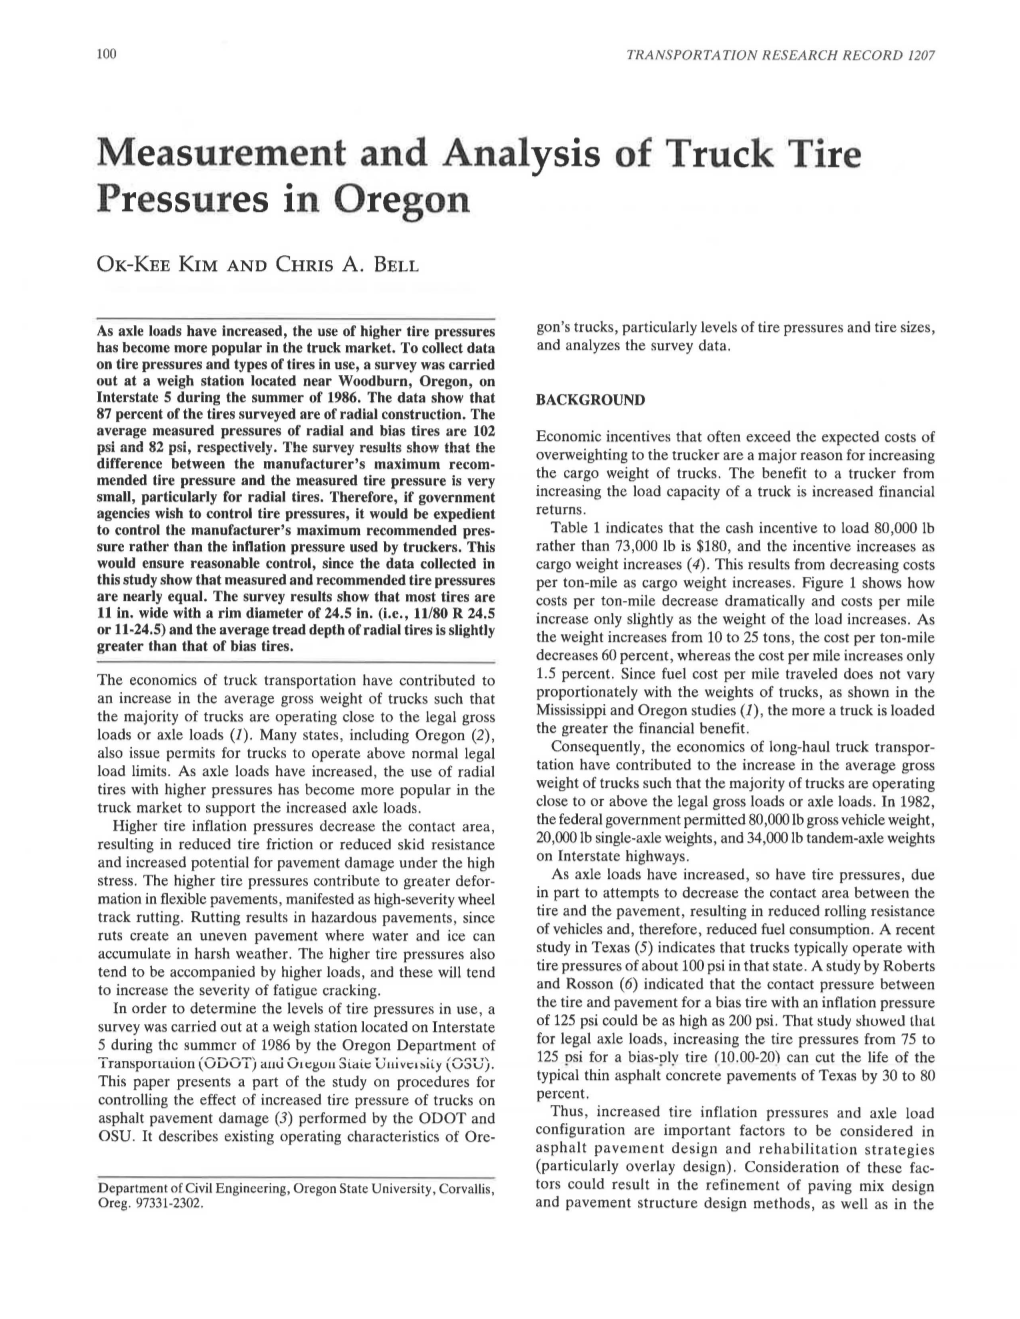 Measurement and Analysis of Truck Tire Pressures in Oregon